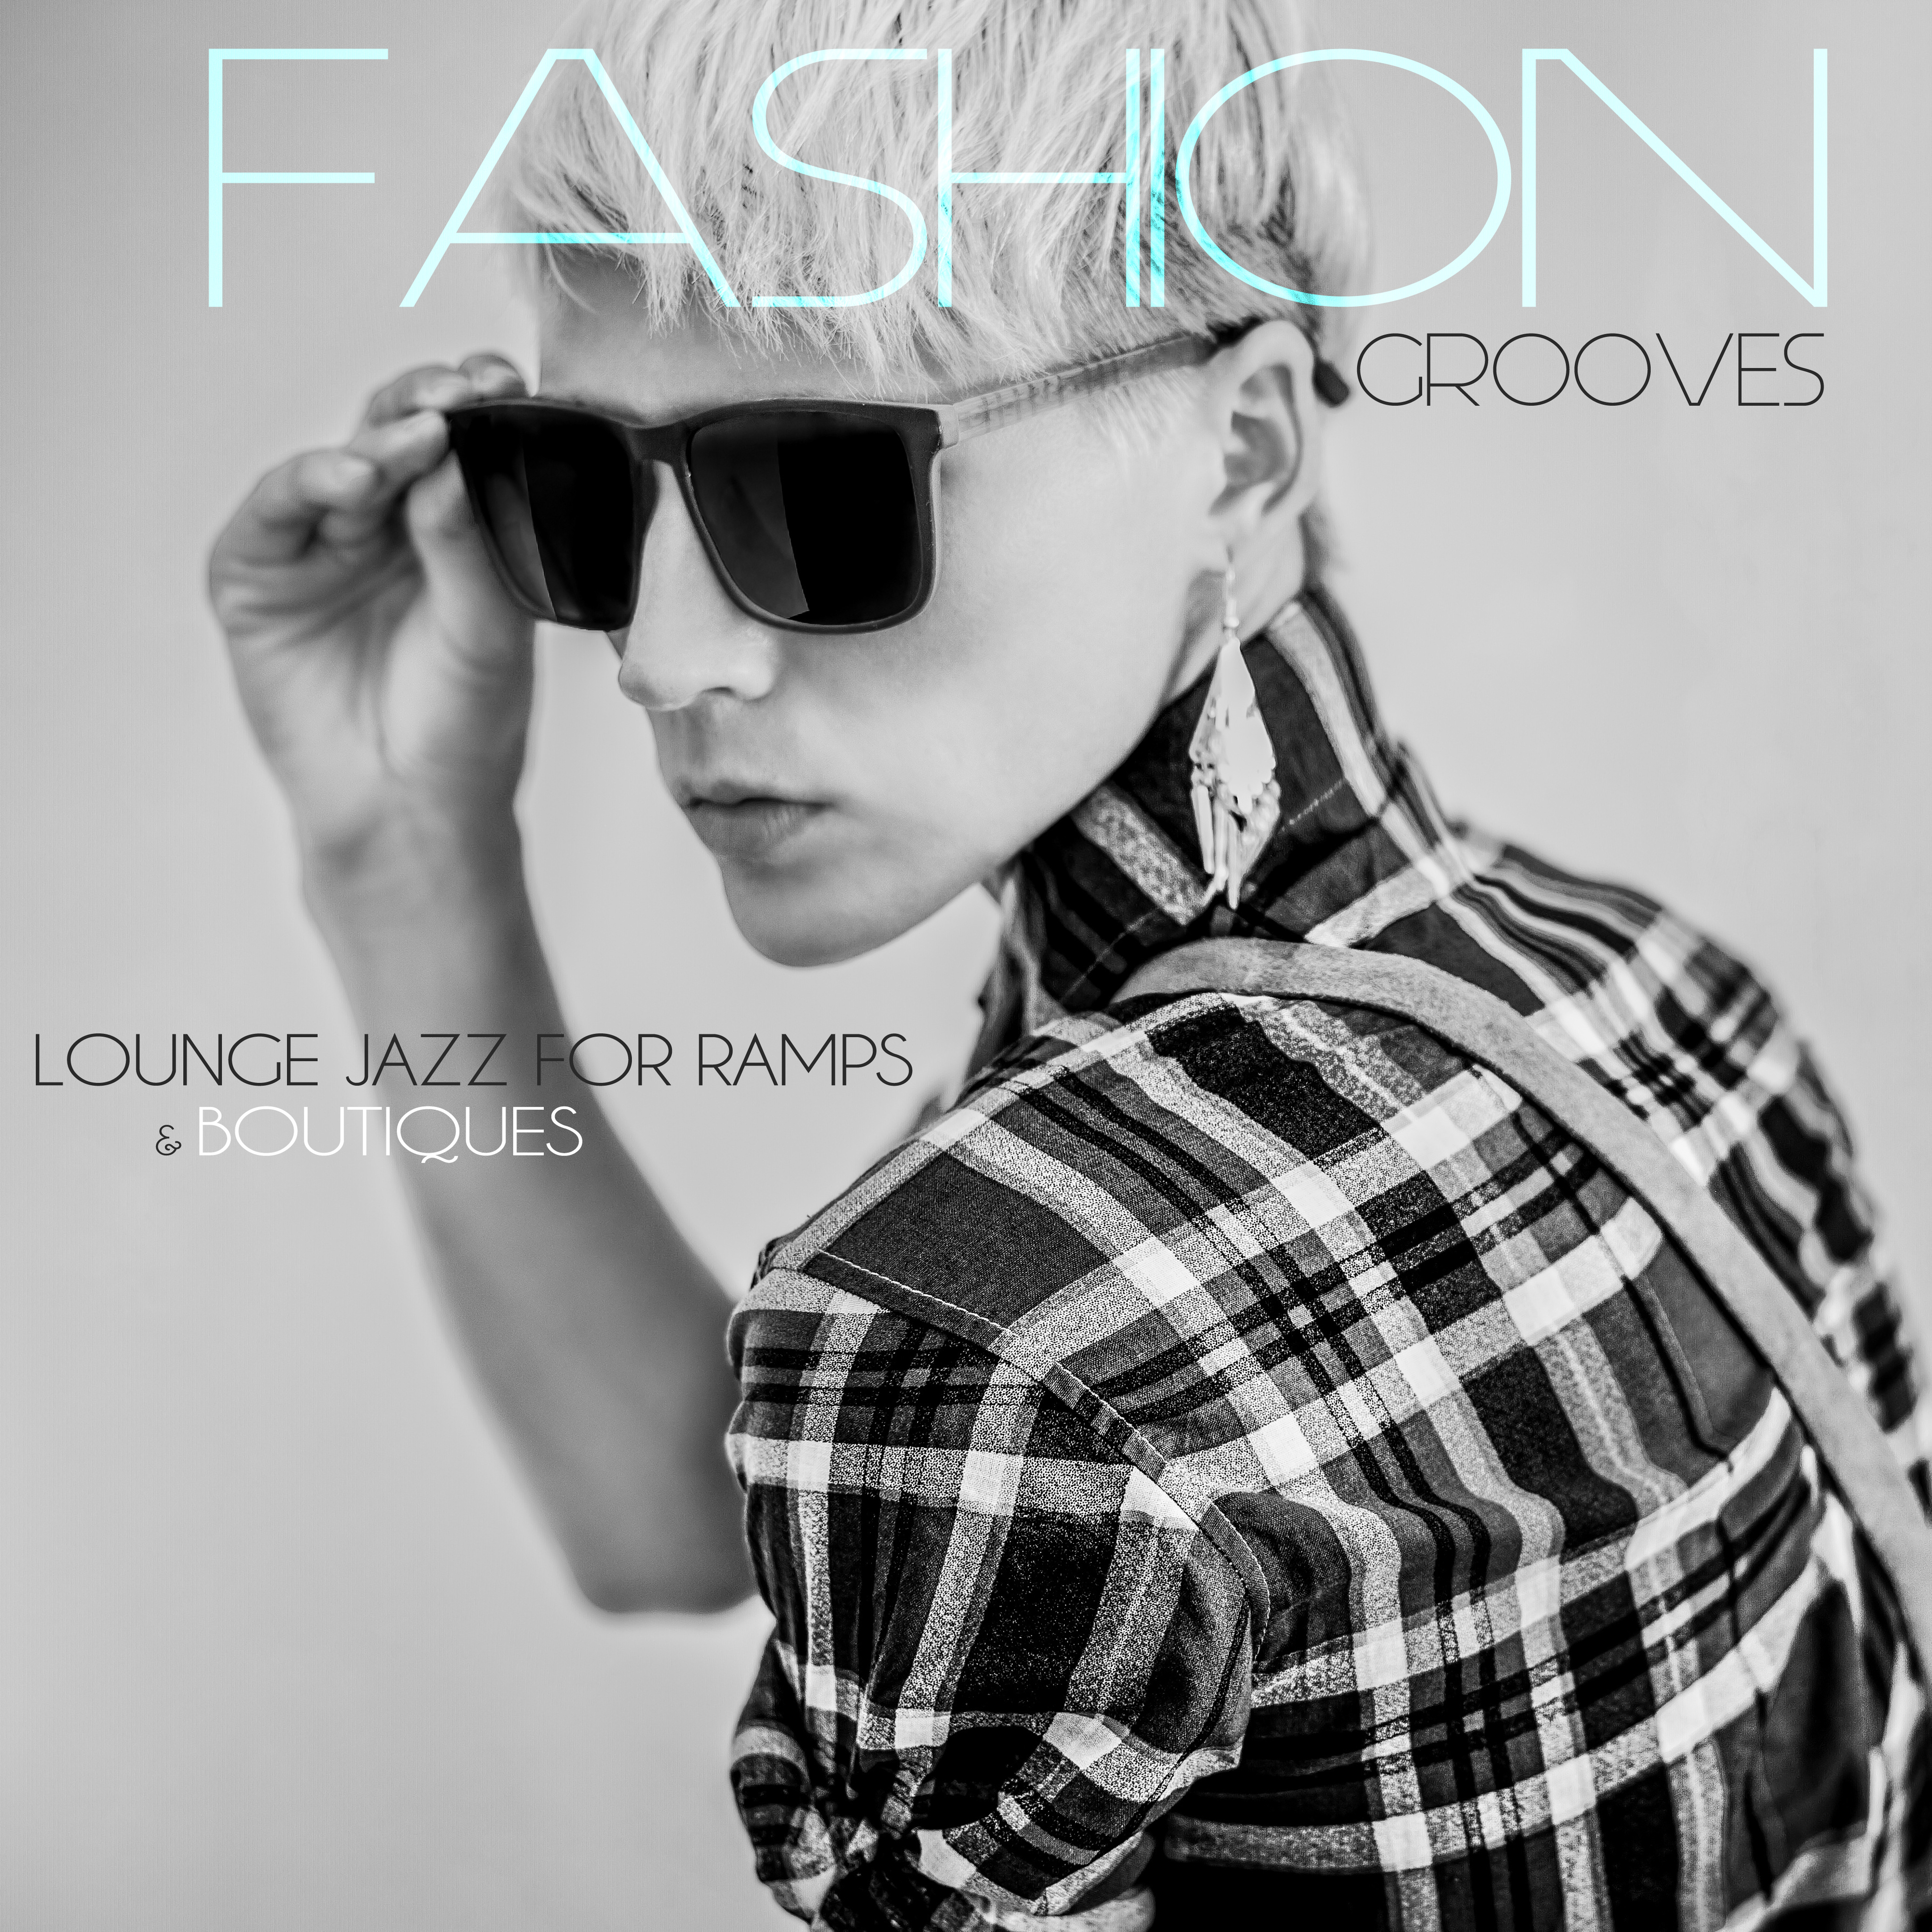 Fashion Grooves - Lounge Jazz for Ramps & Boutiques